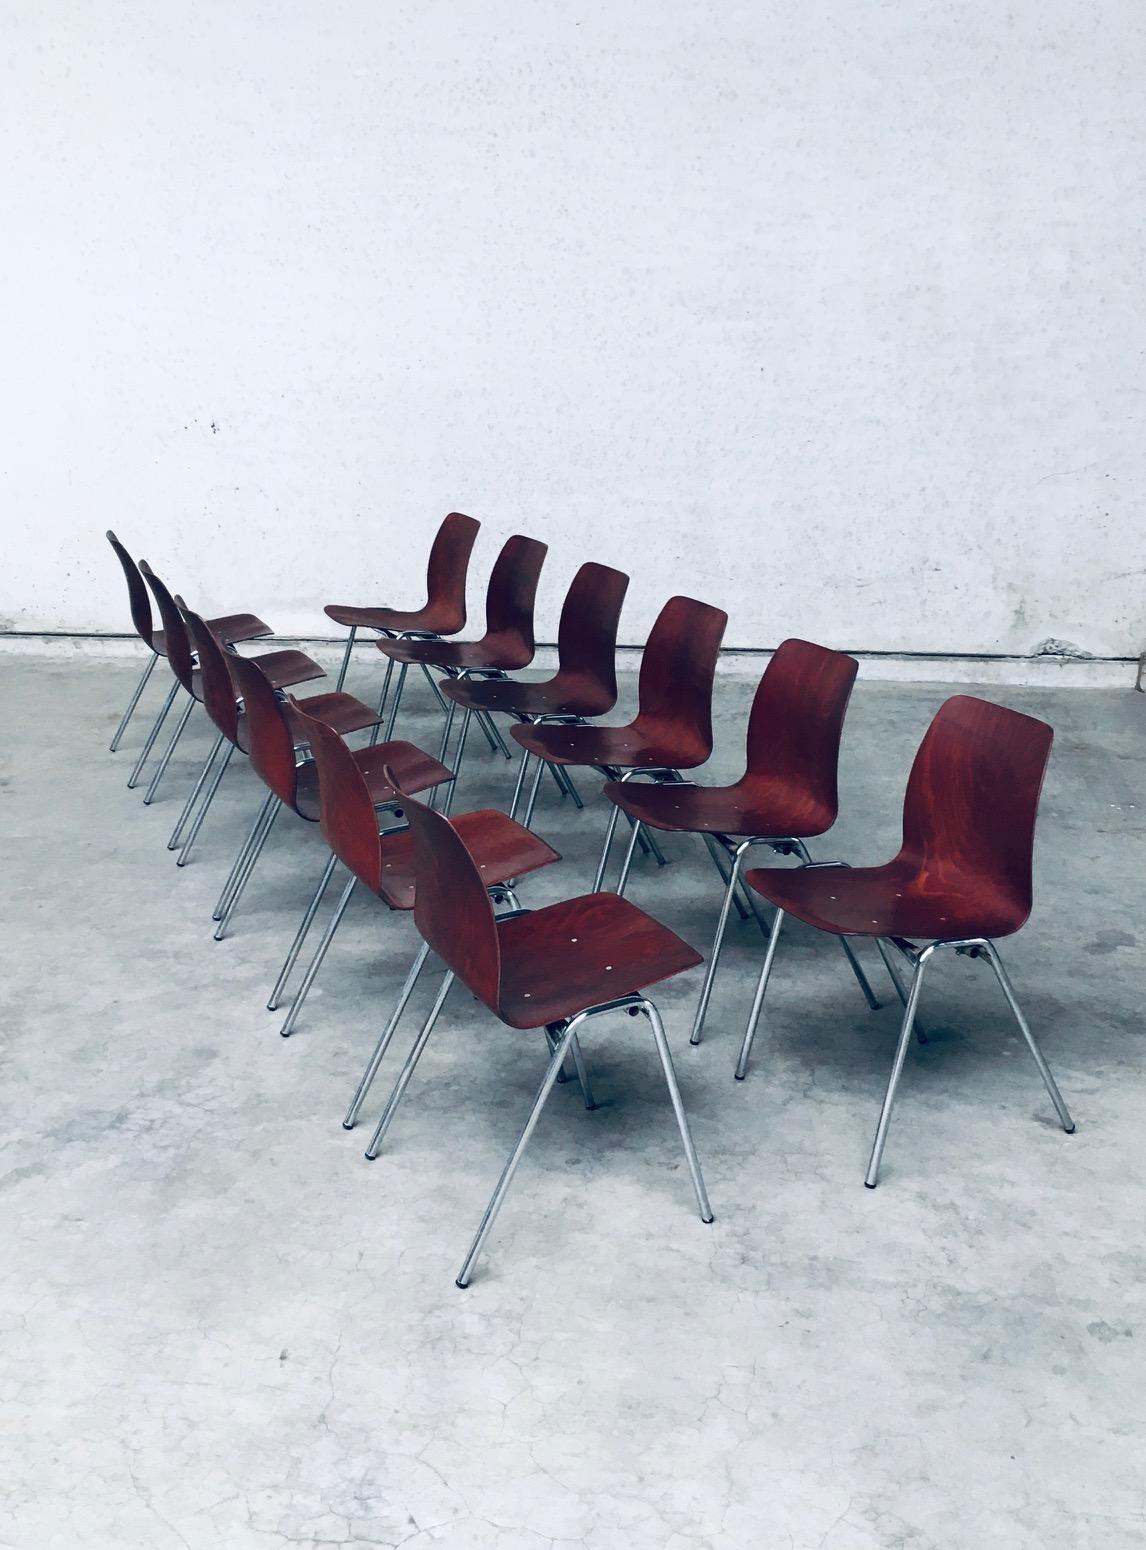 Mid-Century Modern Midcentury Design Stacking Chairs by Elmar Flötotto for Pagholz, 1960's Germany For Sale